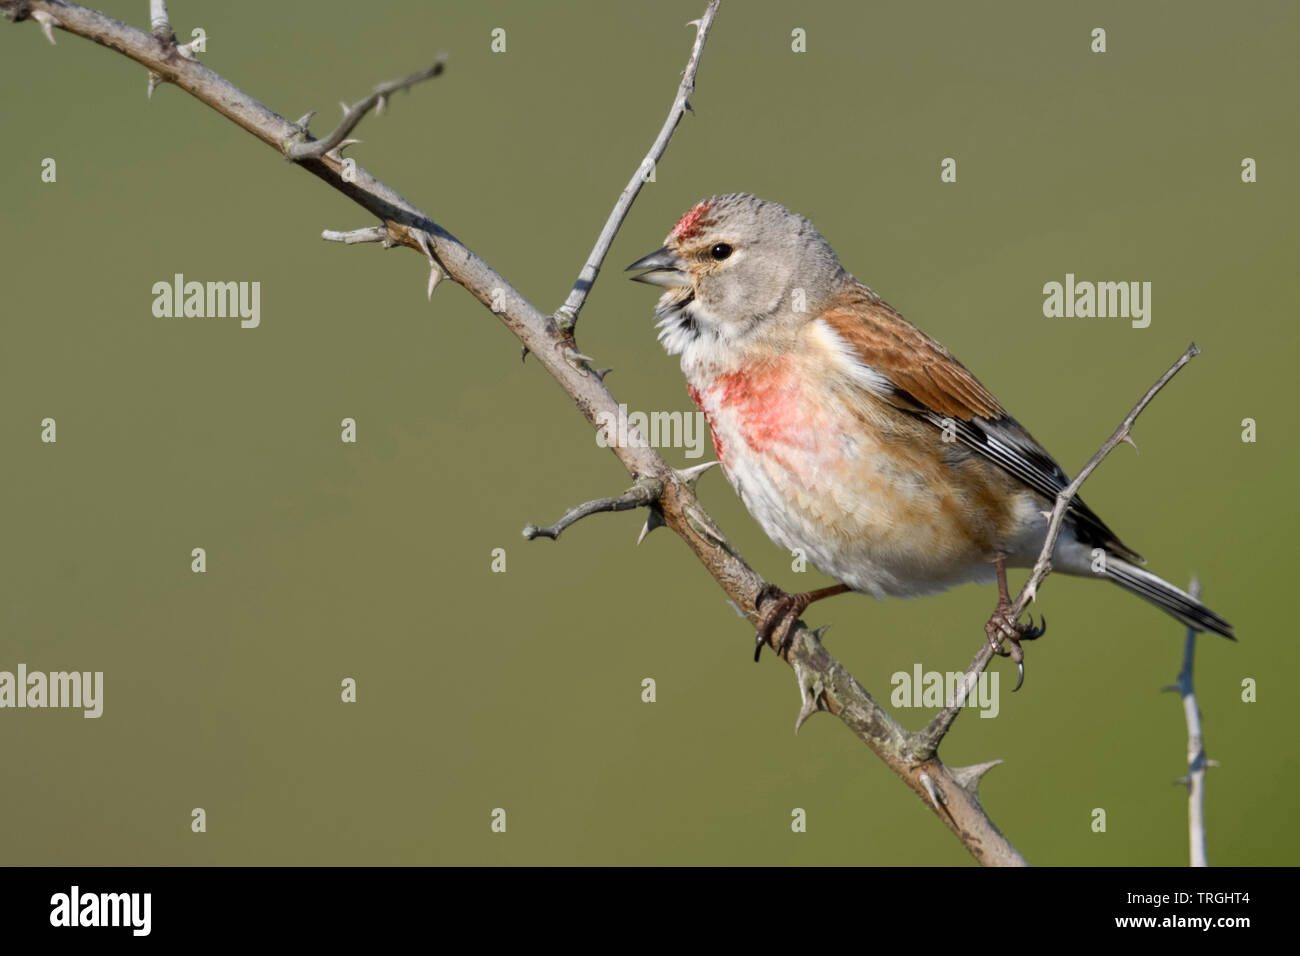 Common Linnet / Bluthänfling ( Carduelis cannabina ), male bird in breeding dress, singing, perched on a dry thorny blackberry tendril, wildlife, Euro Stock Photo